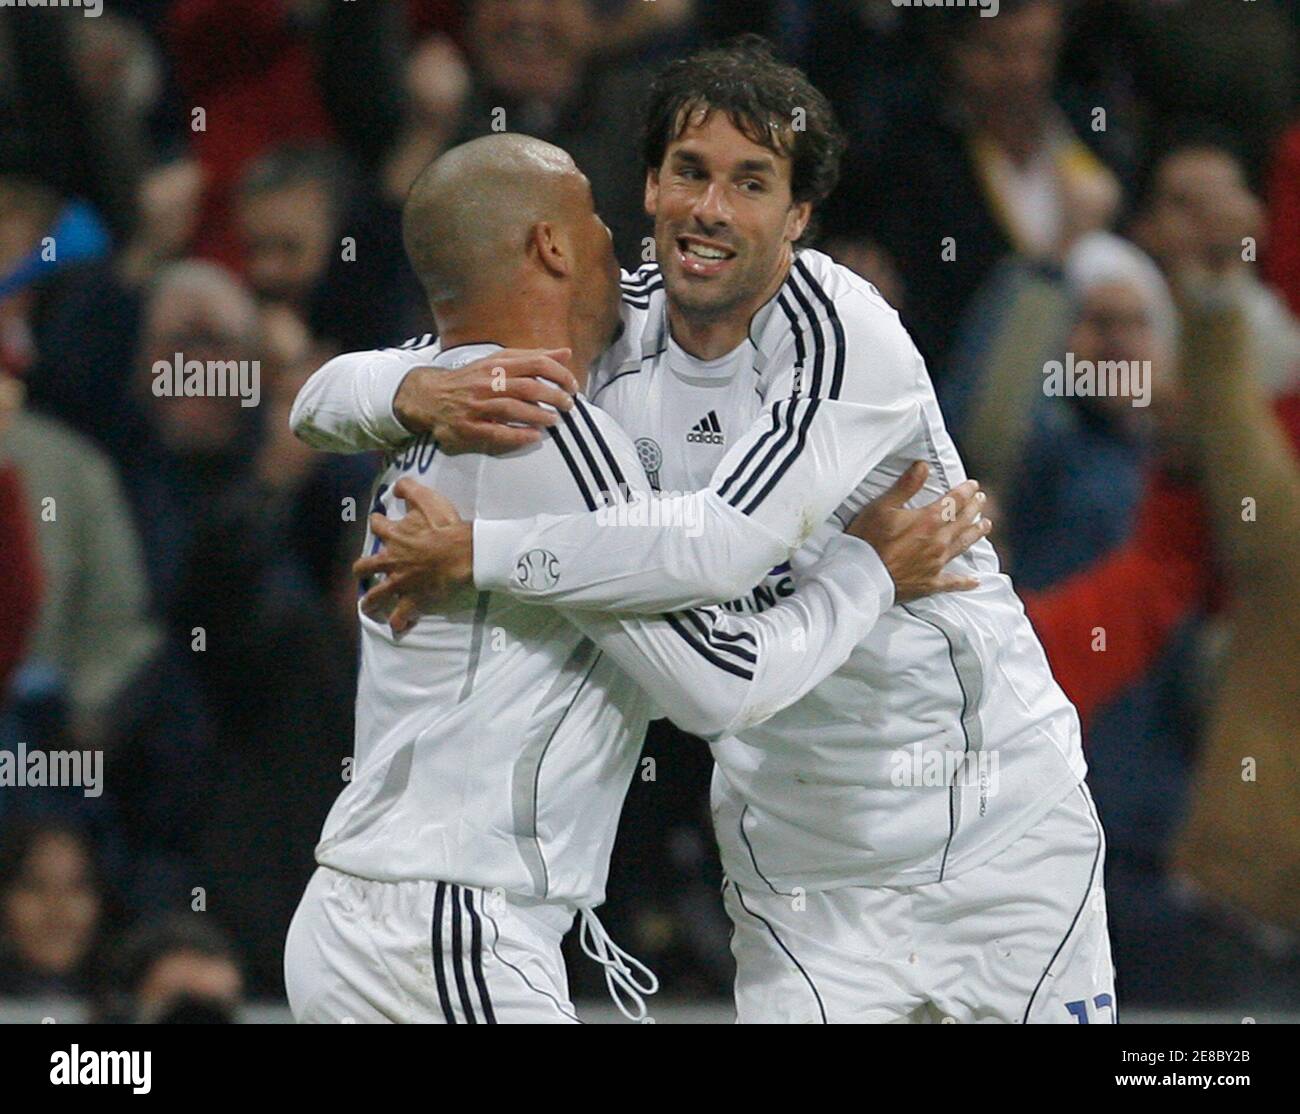 Real Madrid's Ronaldo (L) is congratulated by his team mate Ruud Van  Nistelrooy after scoring against Athletic Bilbao during their Spanish First  Division soccer match at the Santiago Bernabeu stadium in Madrid